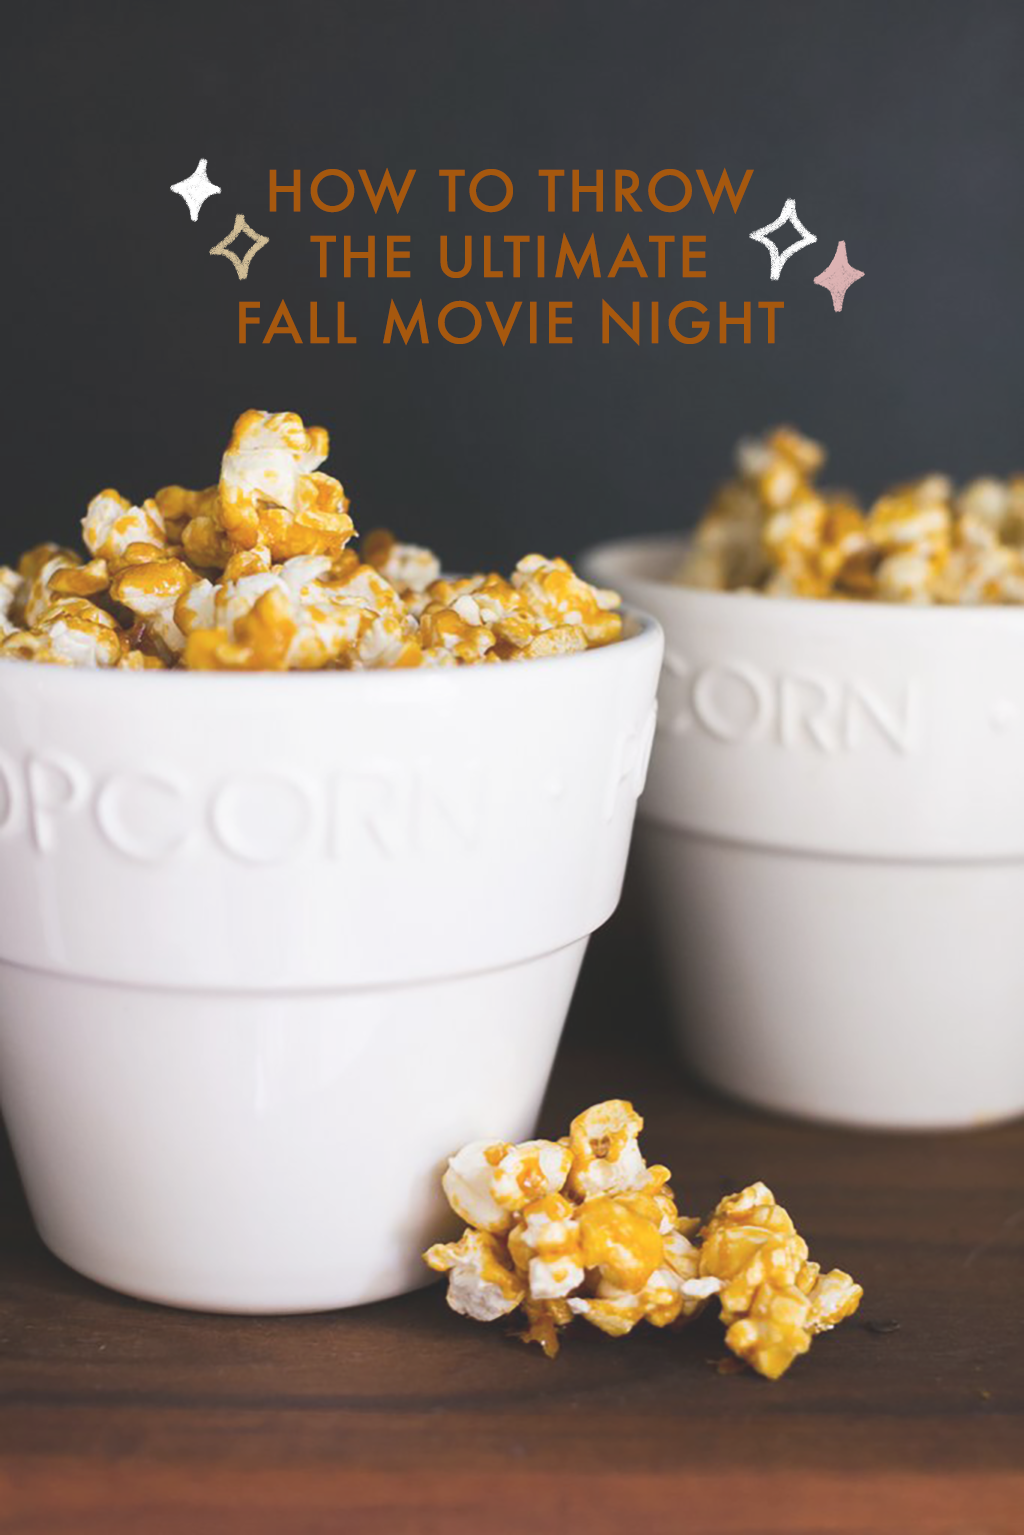 How to Throw the Ultimate Fall Movie Night